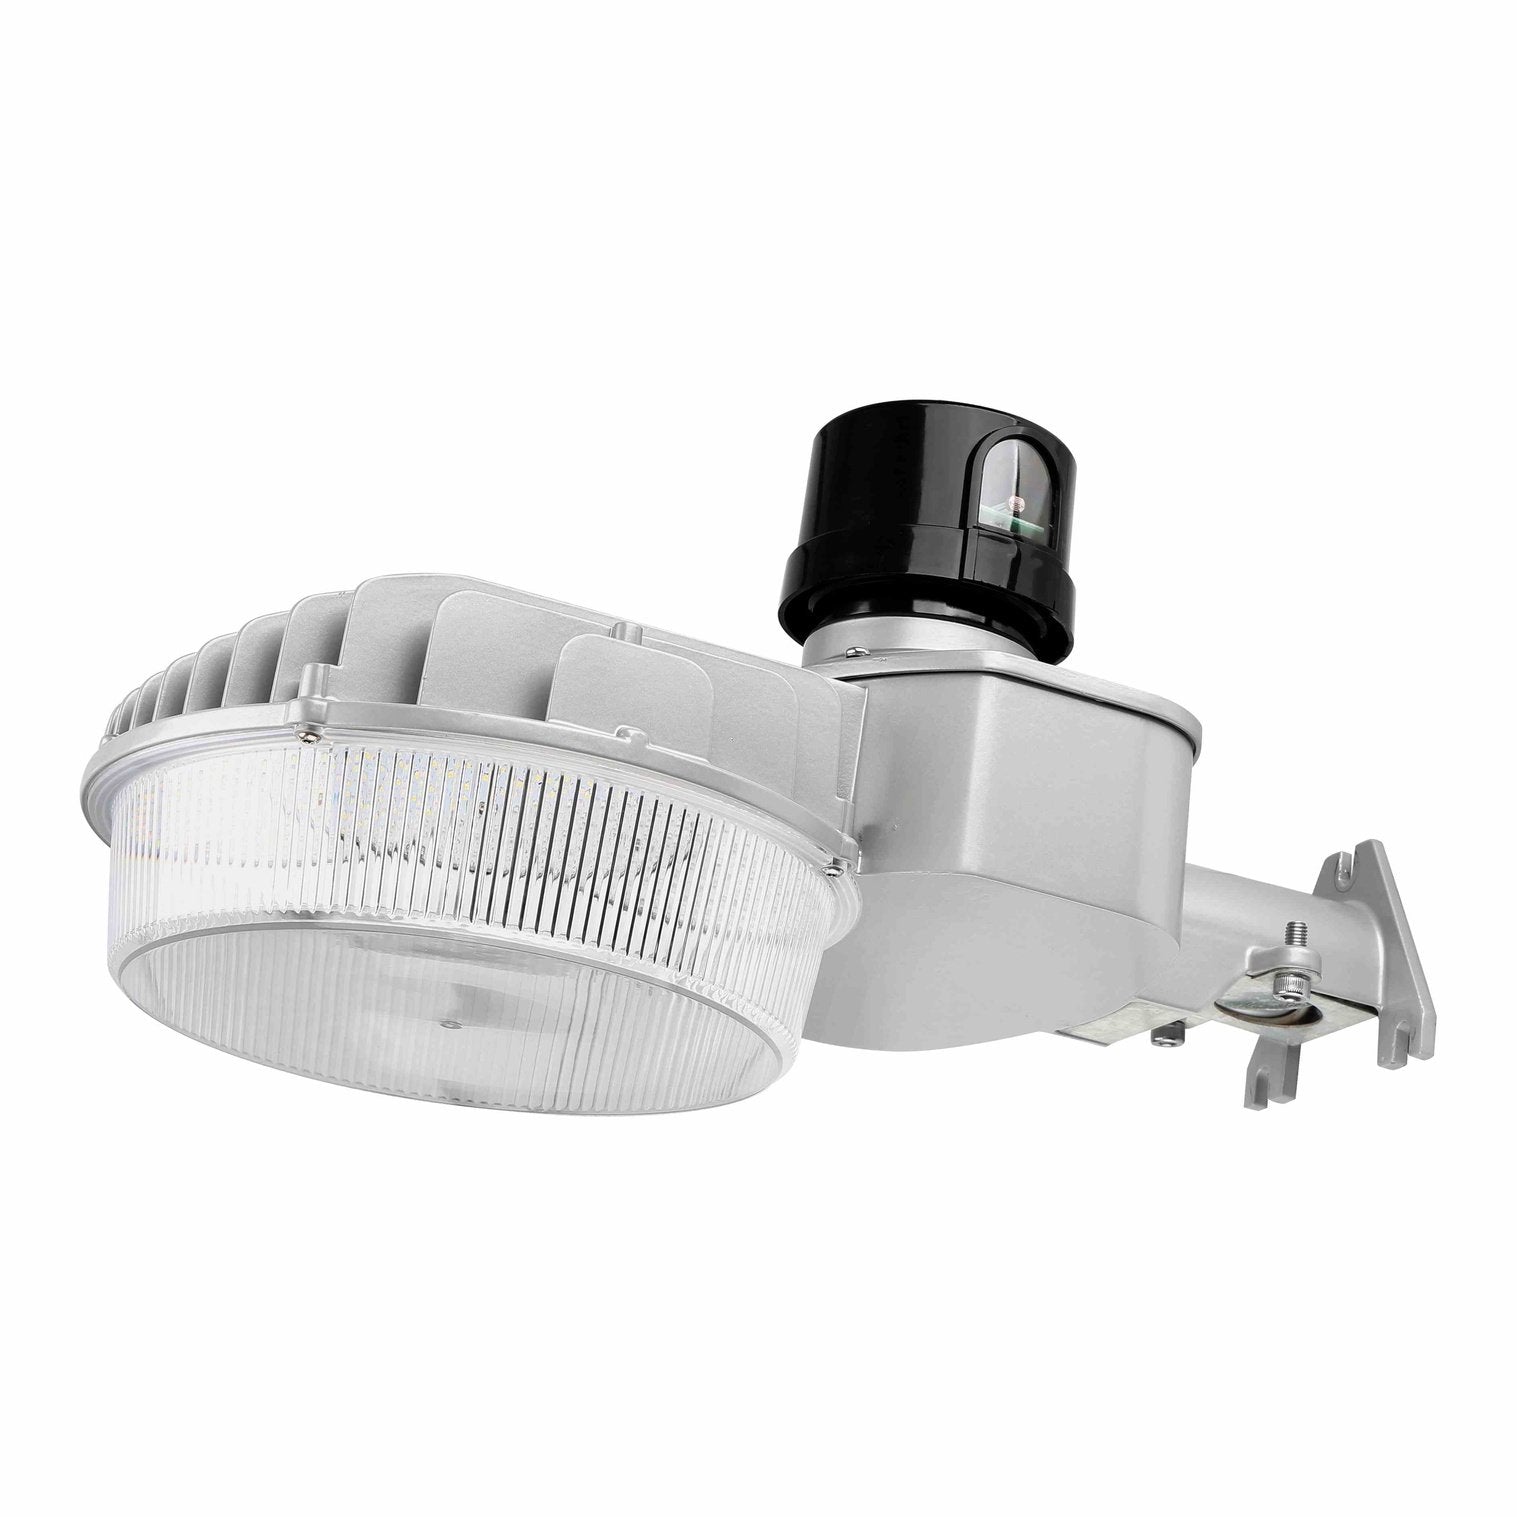 MDD05 LED Dusk to Dawn Barn Light with Photocell 90W, 12200LM, 120-277VAC, 5000K, Silver Gray